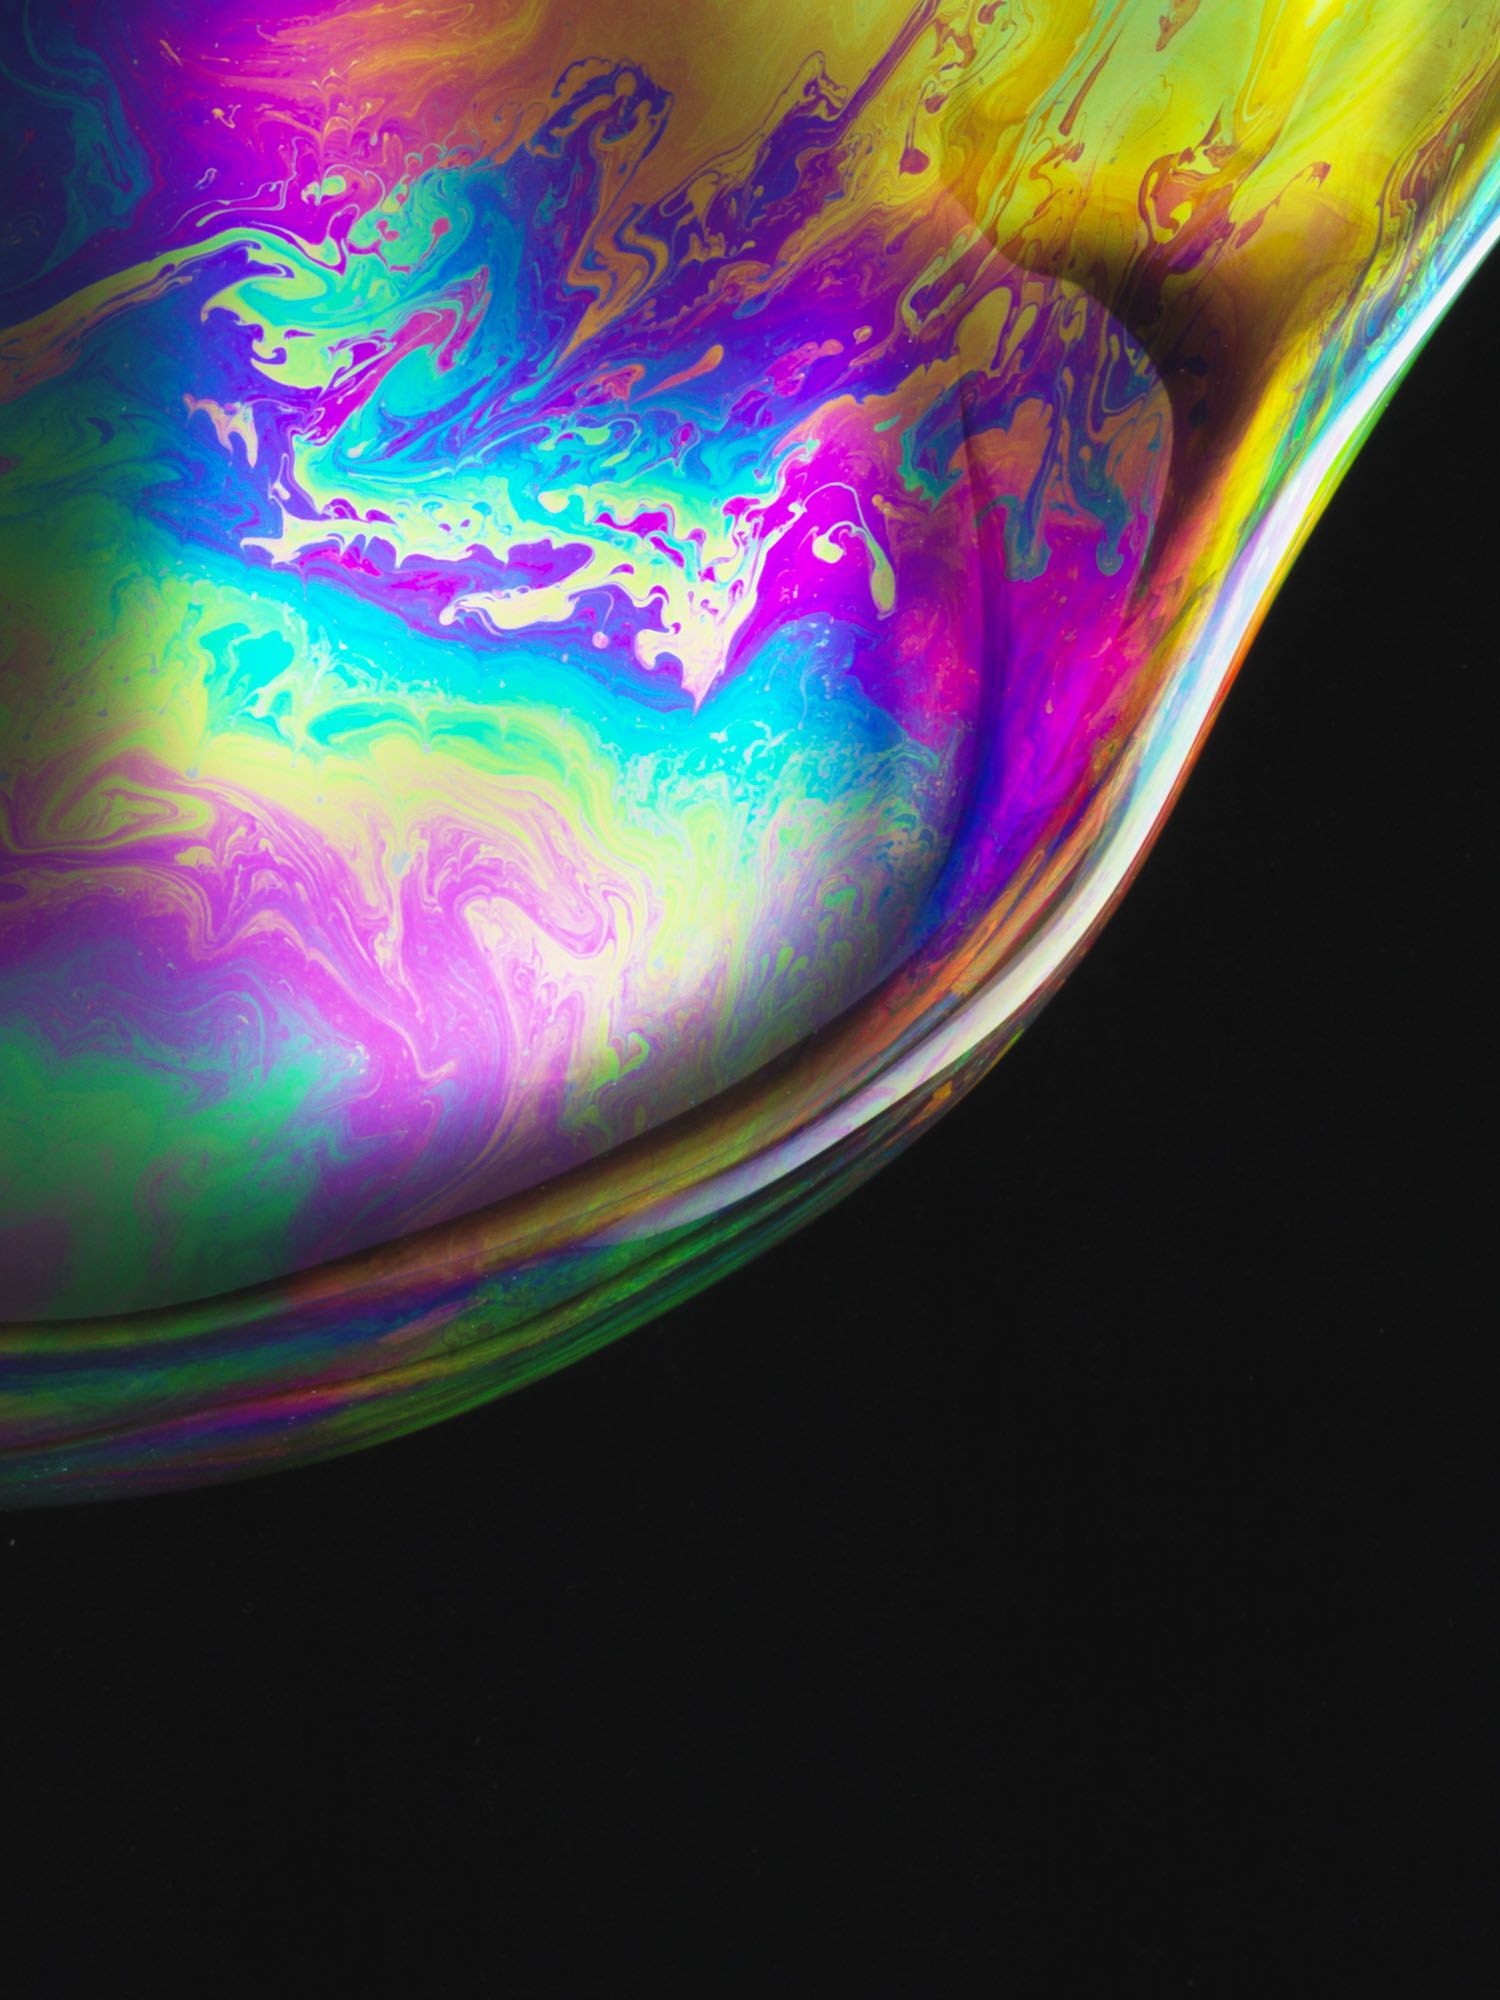 Cosmic Bubbles photographed by Jonathan Knowles #JonathanKnowles ...